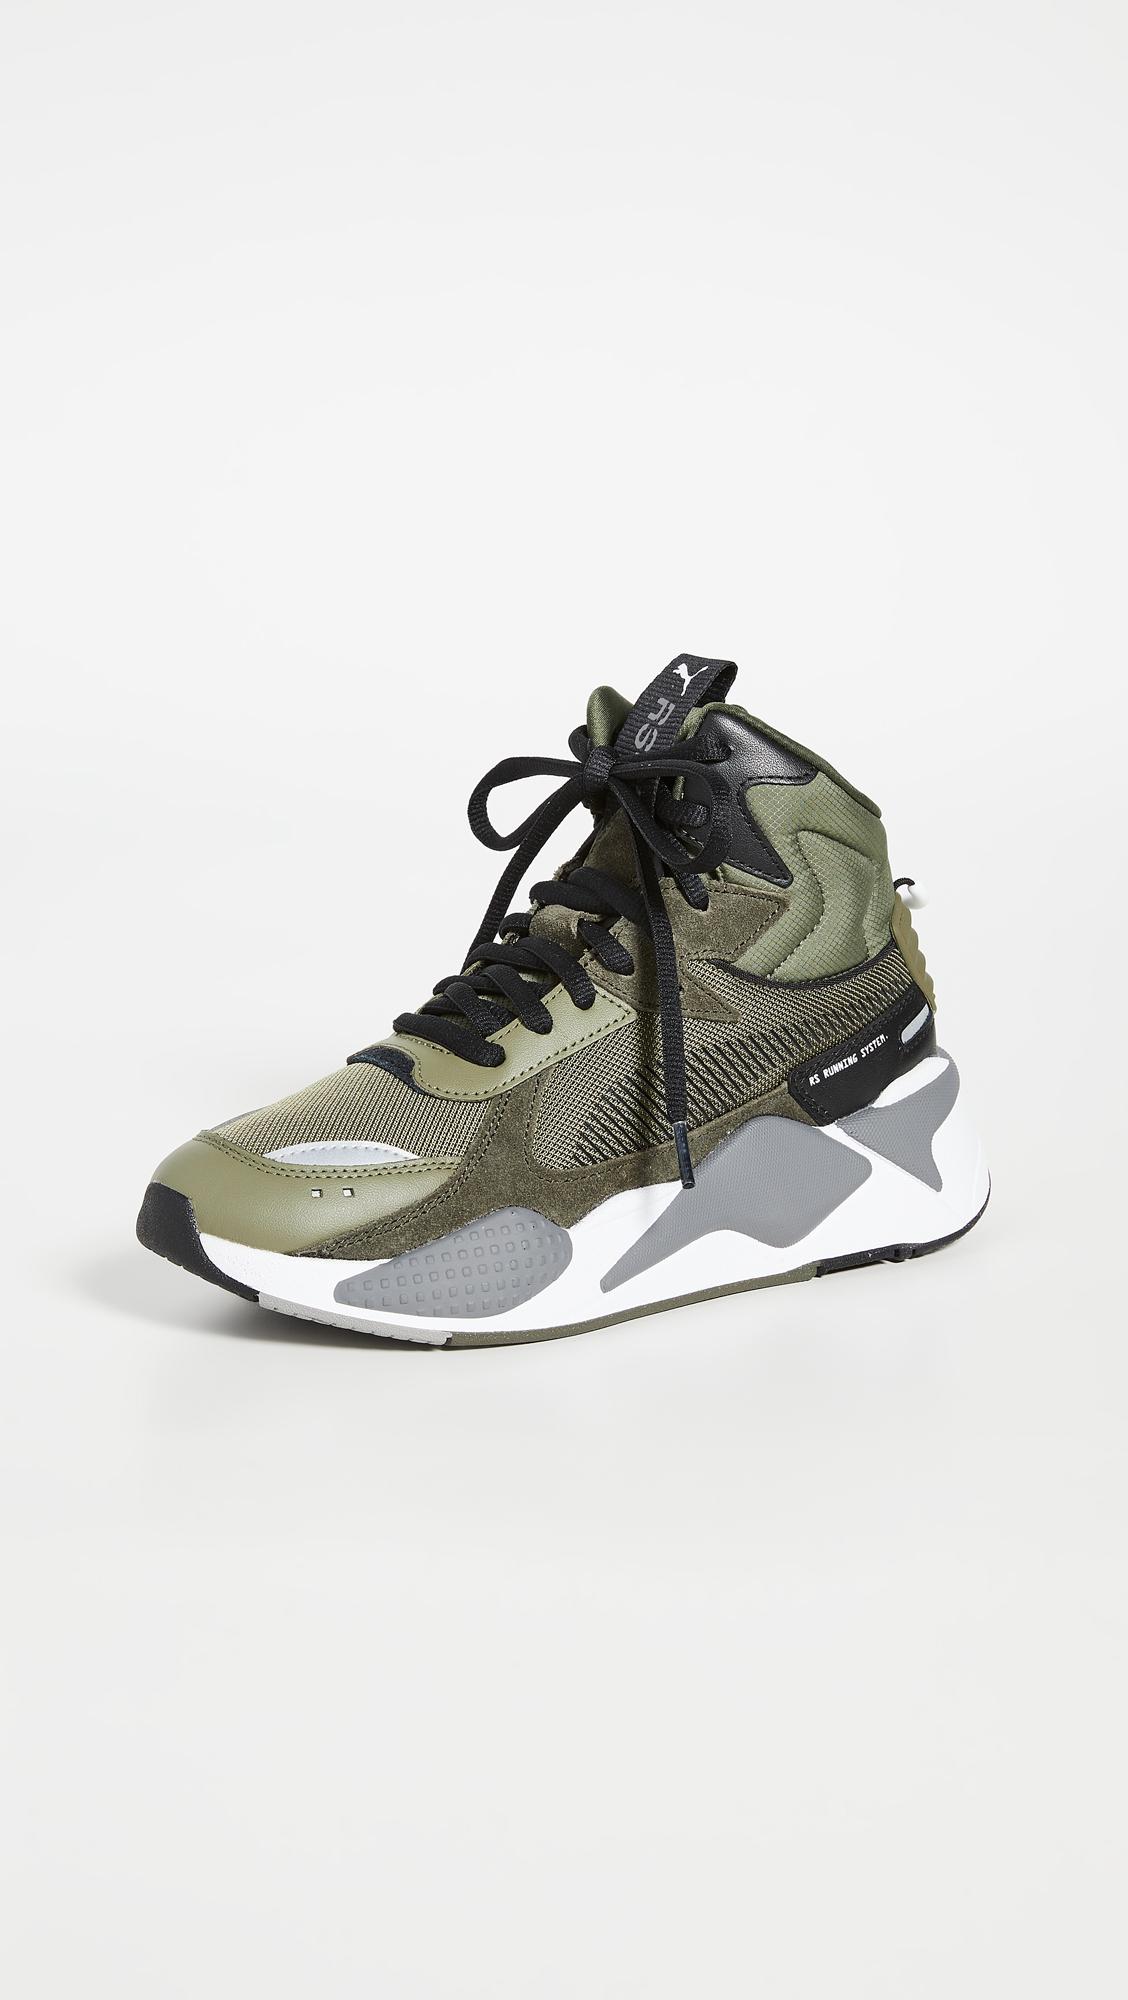 PUMA Rubber Rs-x Midtop Utility Sneakers - Lyst